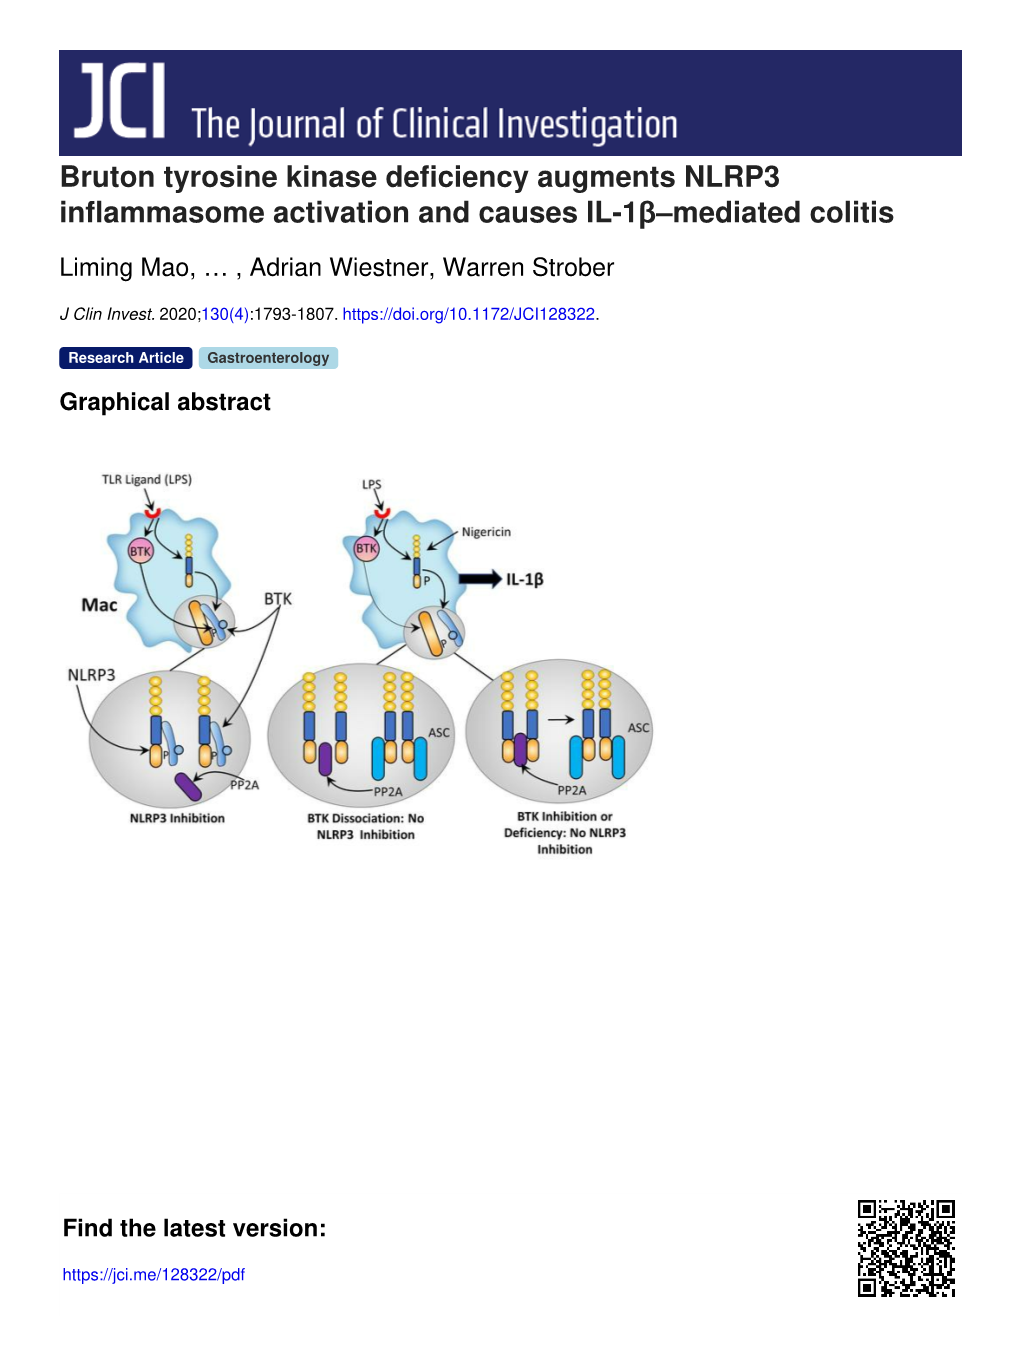 Bruton Tyrosine Kinase Deficiency Augments NLRP3 Inflammasome Activation and Causes IL-1Β–Mediated Colitis